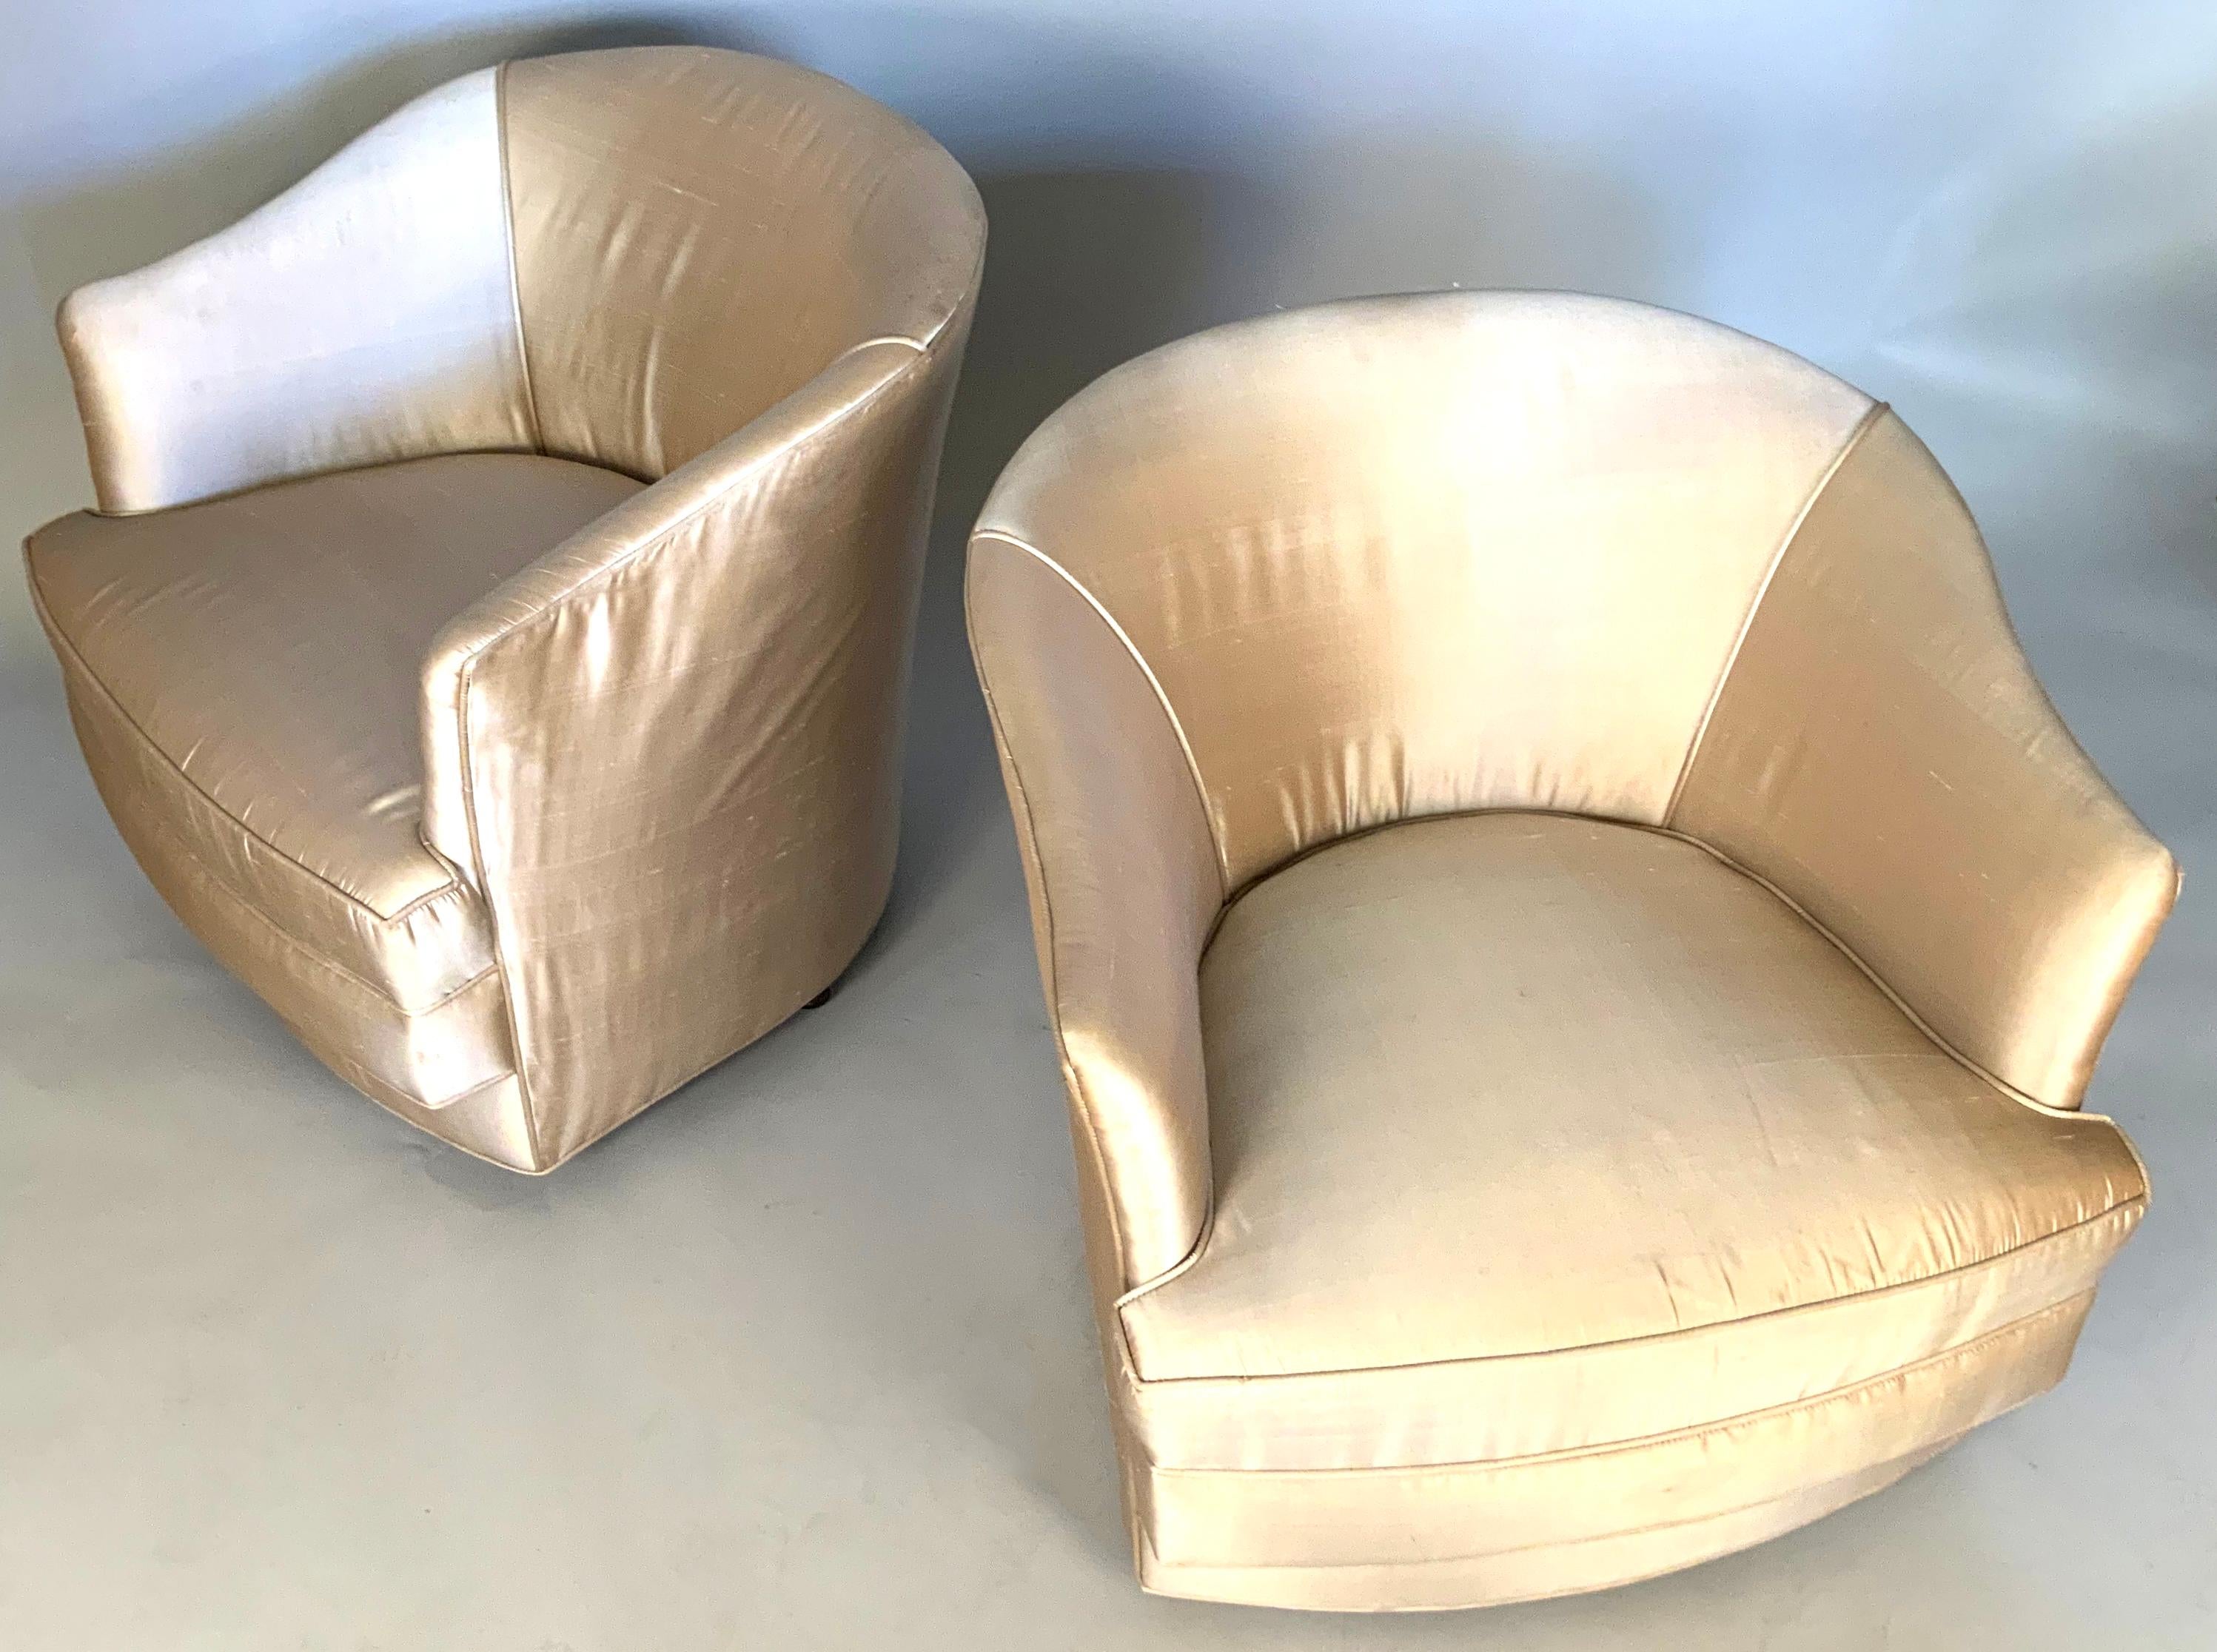 A very nice pair of vintage 1960s swivel tub shaped lounge chairs by John Stuart. Nice scale and proportion, mounted on swivel bases with casters, in their original champagne color silk, which shows average wear for the age, with frayed edges at the